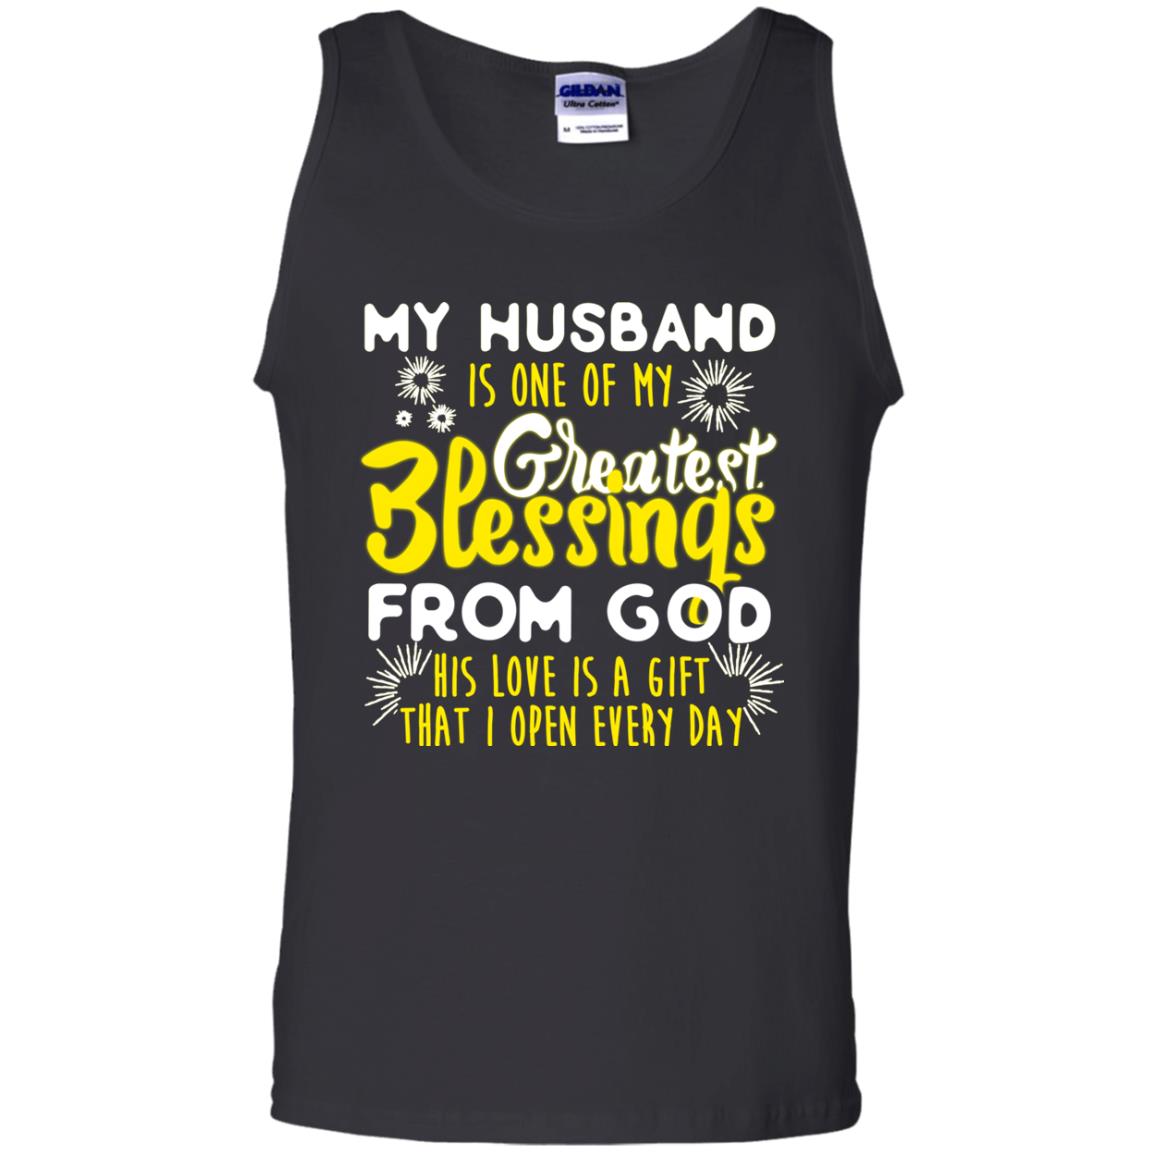 My Husband Is One Of My Greatest Blessings From God His Love Is A Gift That I Open Every Day Shirt For WifeG220 Gildan 100% Cotton Tank Top